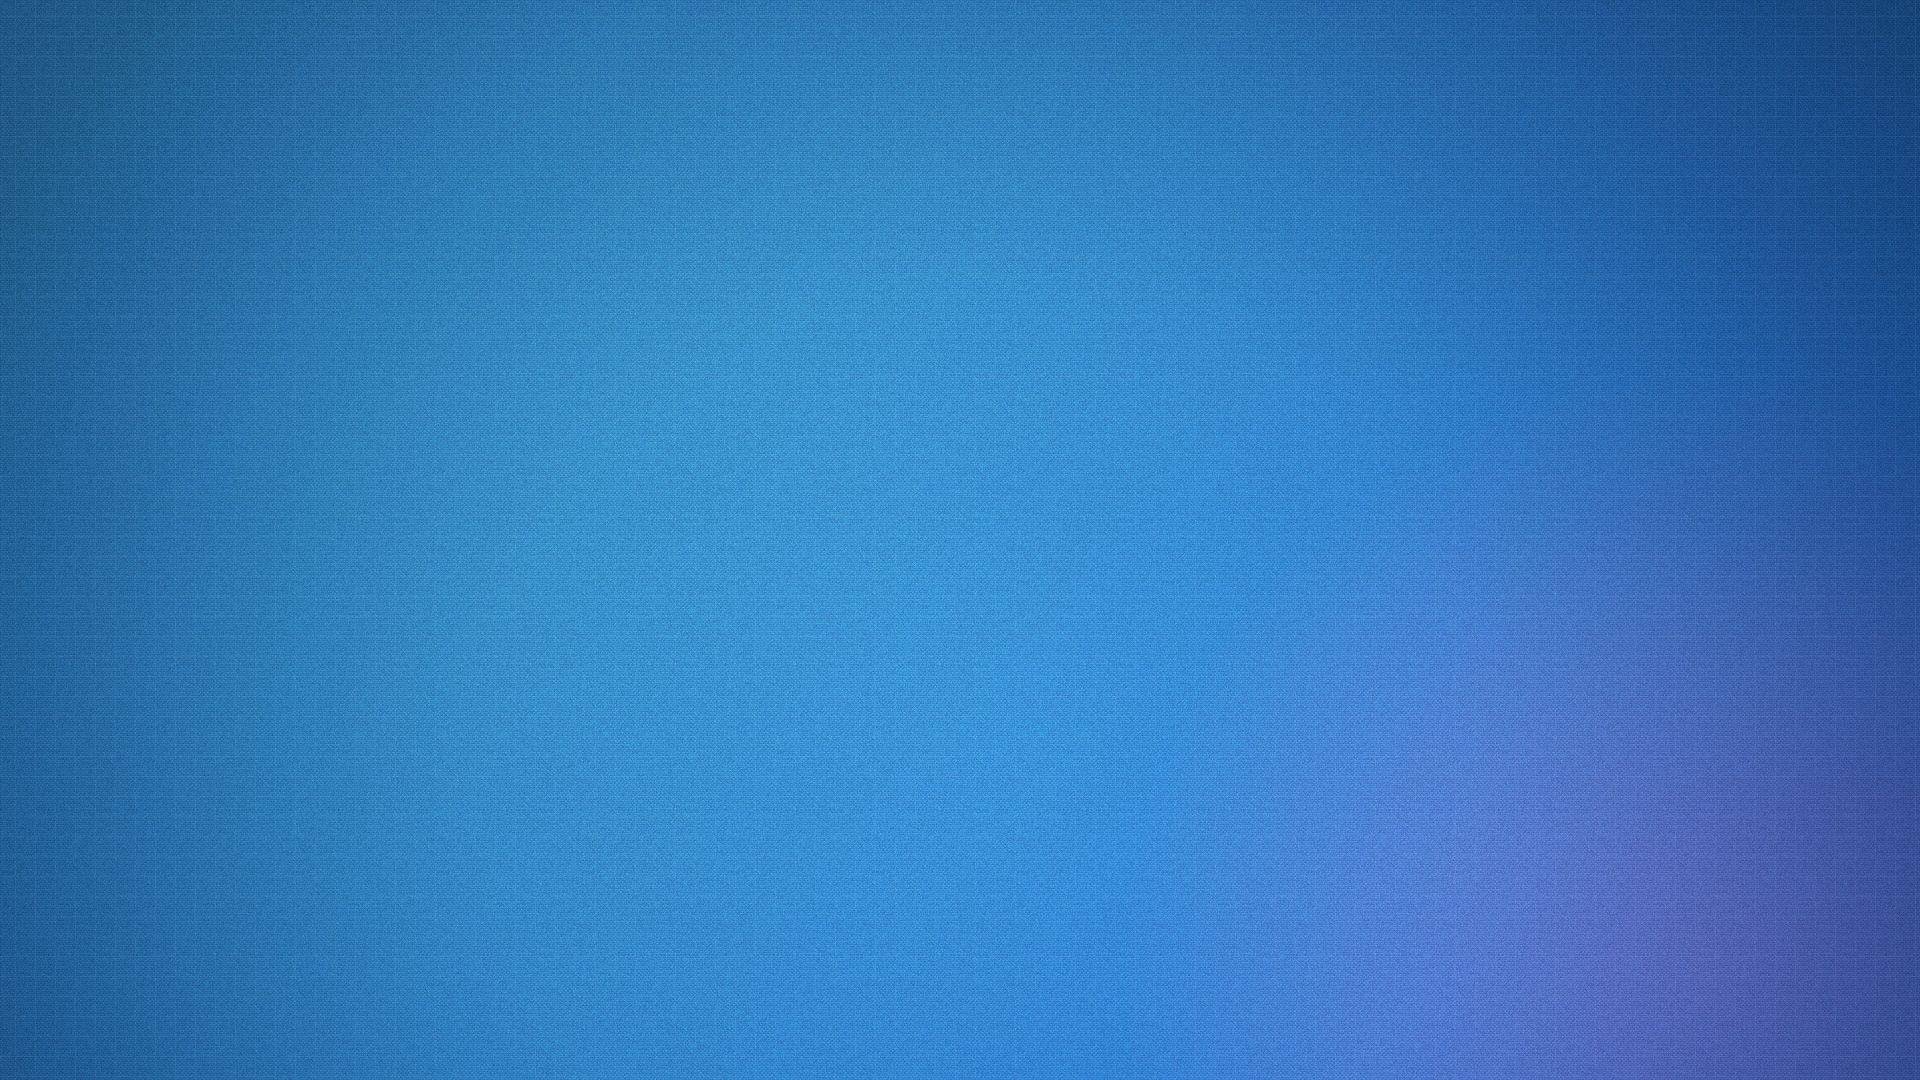 Wallpapers For > Light Blue Backgrounds Designs